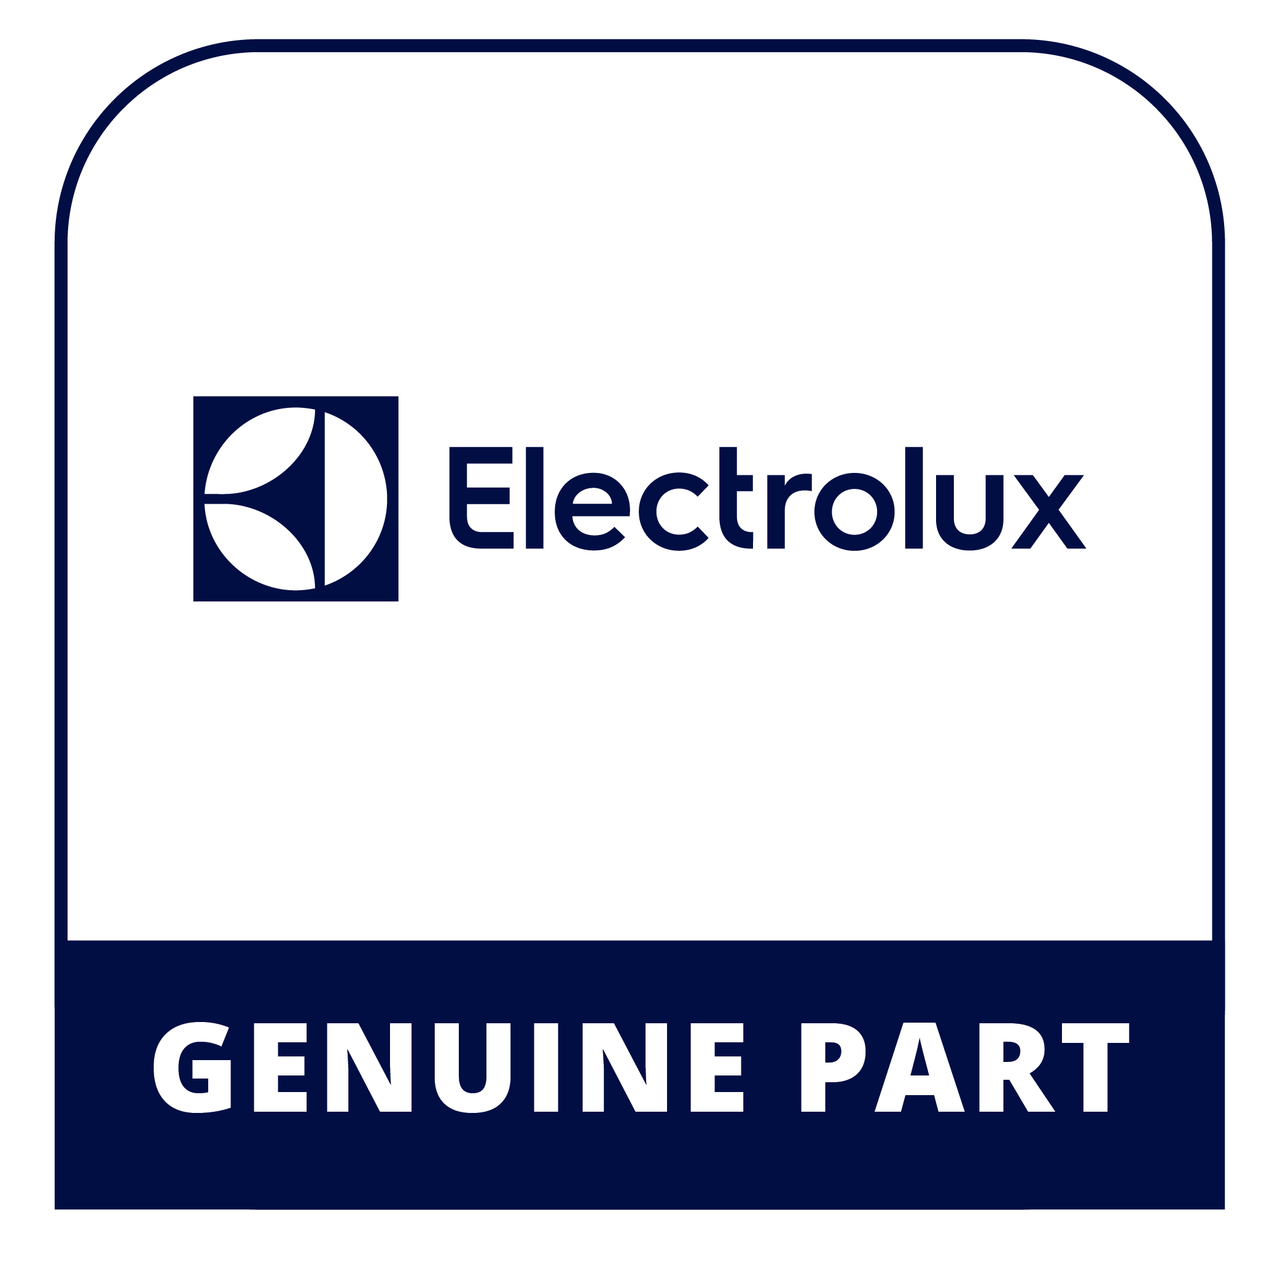 Frigidaire - Electrolux 5304490494 Use & Care Guide - Genuine Electrolux Part